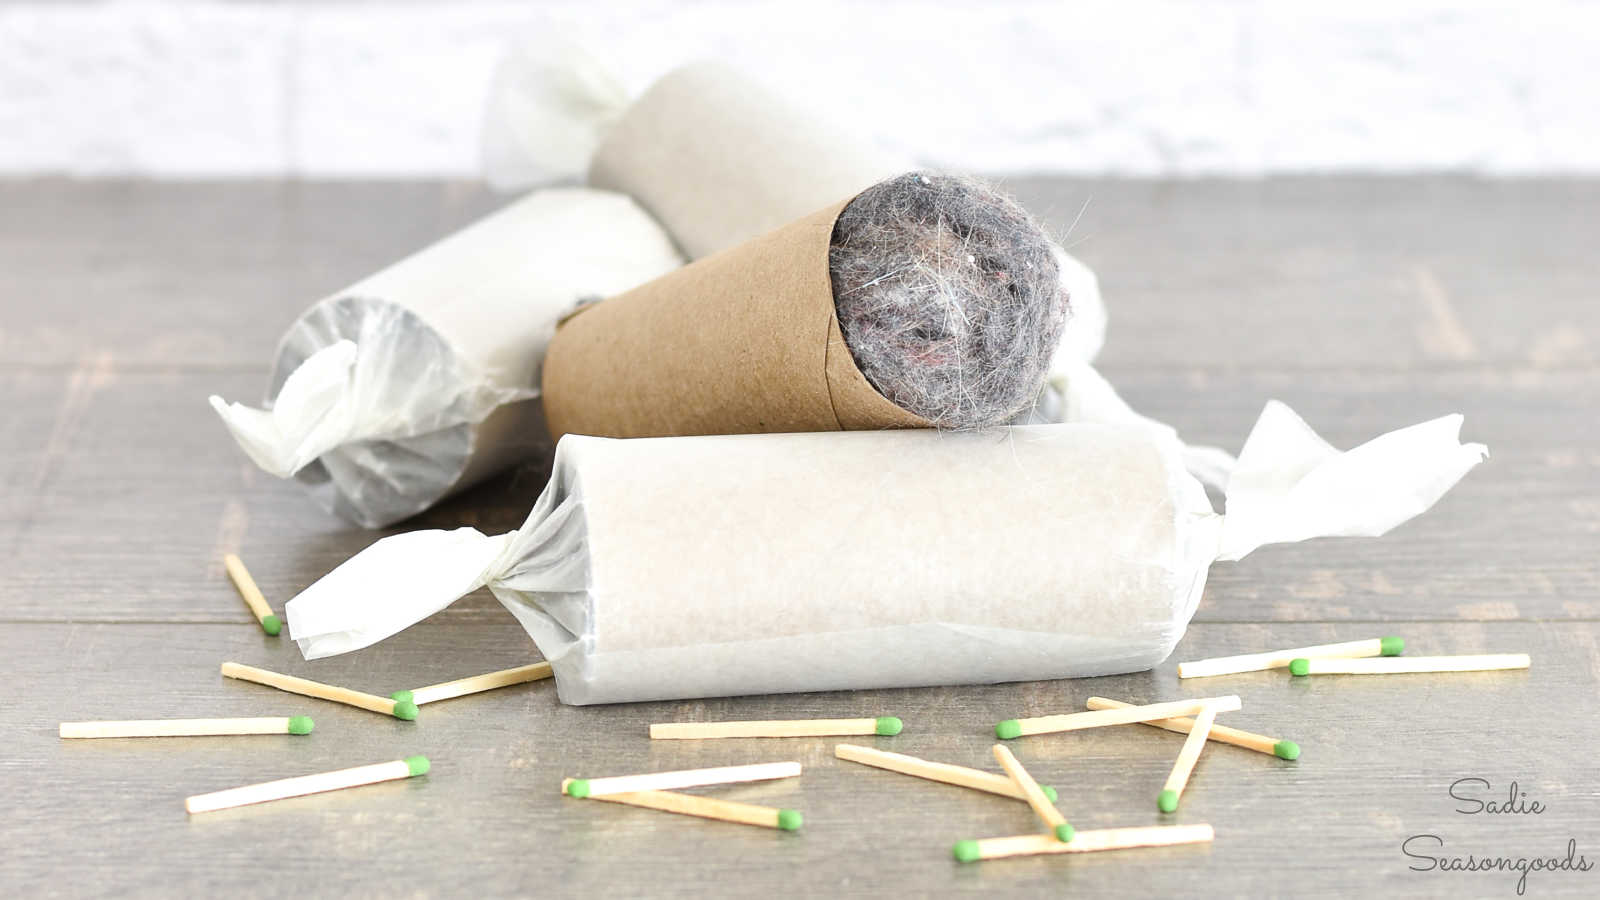 fire starters made from dryer lint